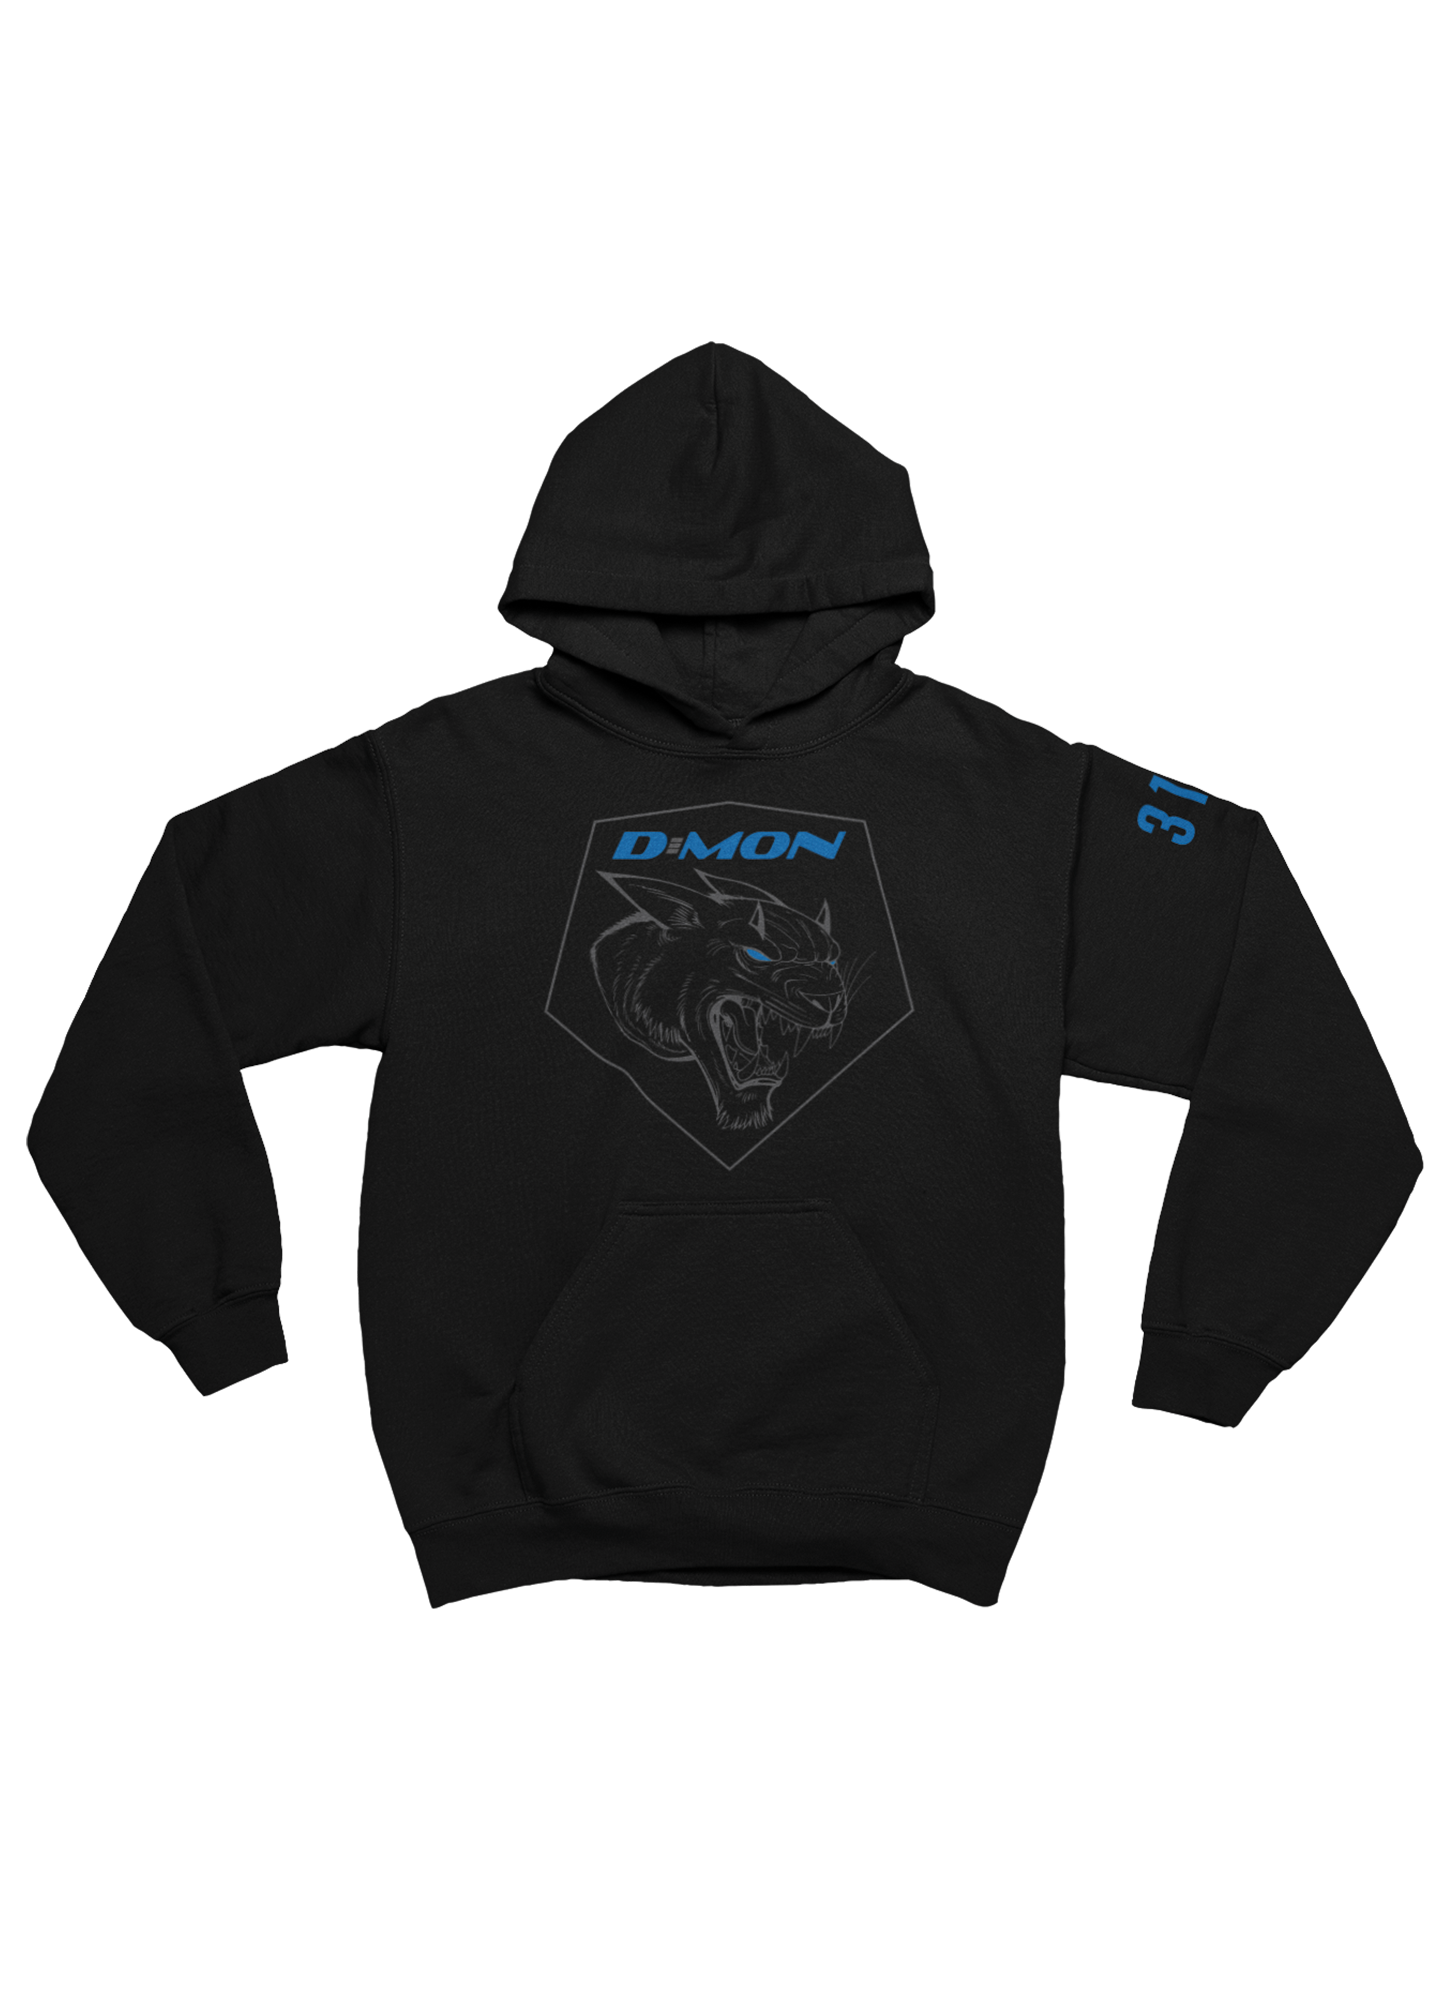 D-MON Hoodie - LIMITED EDITION